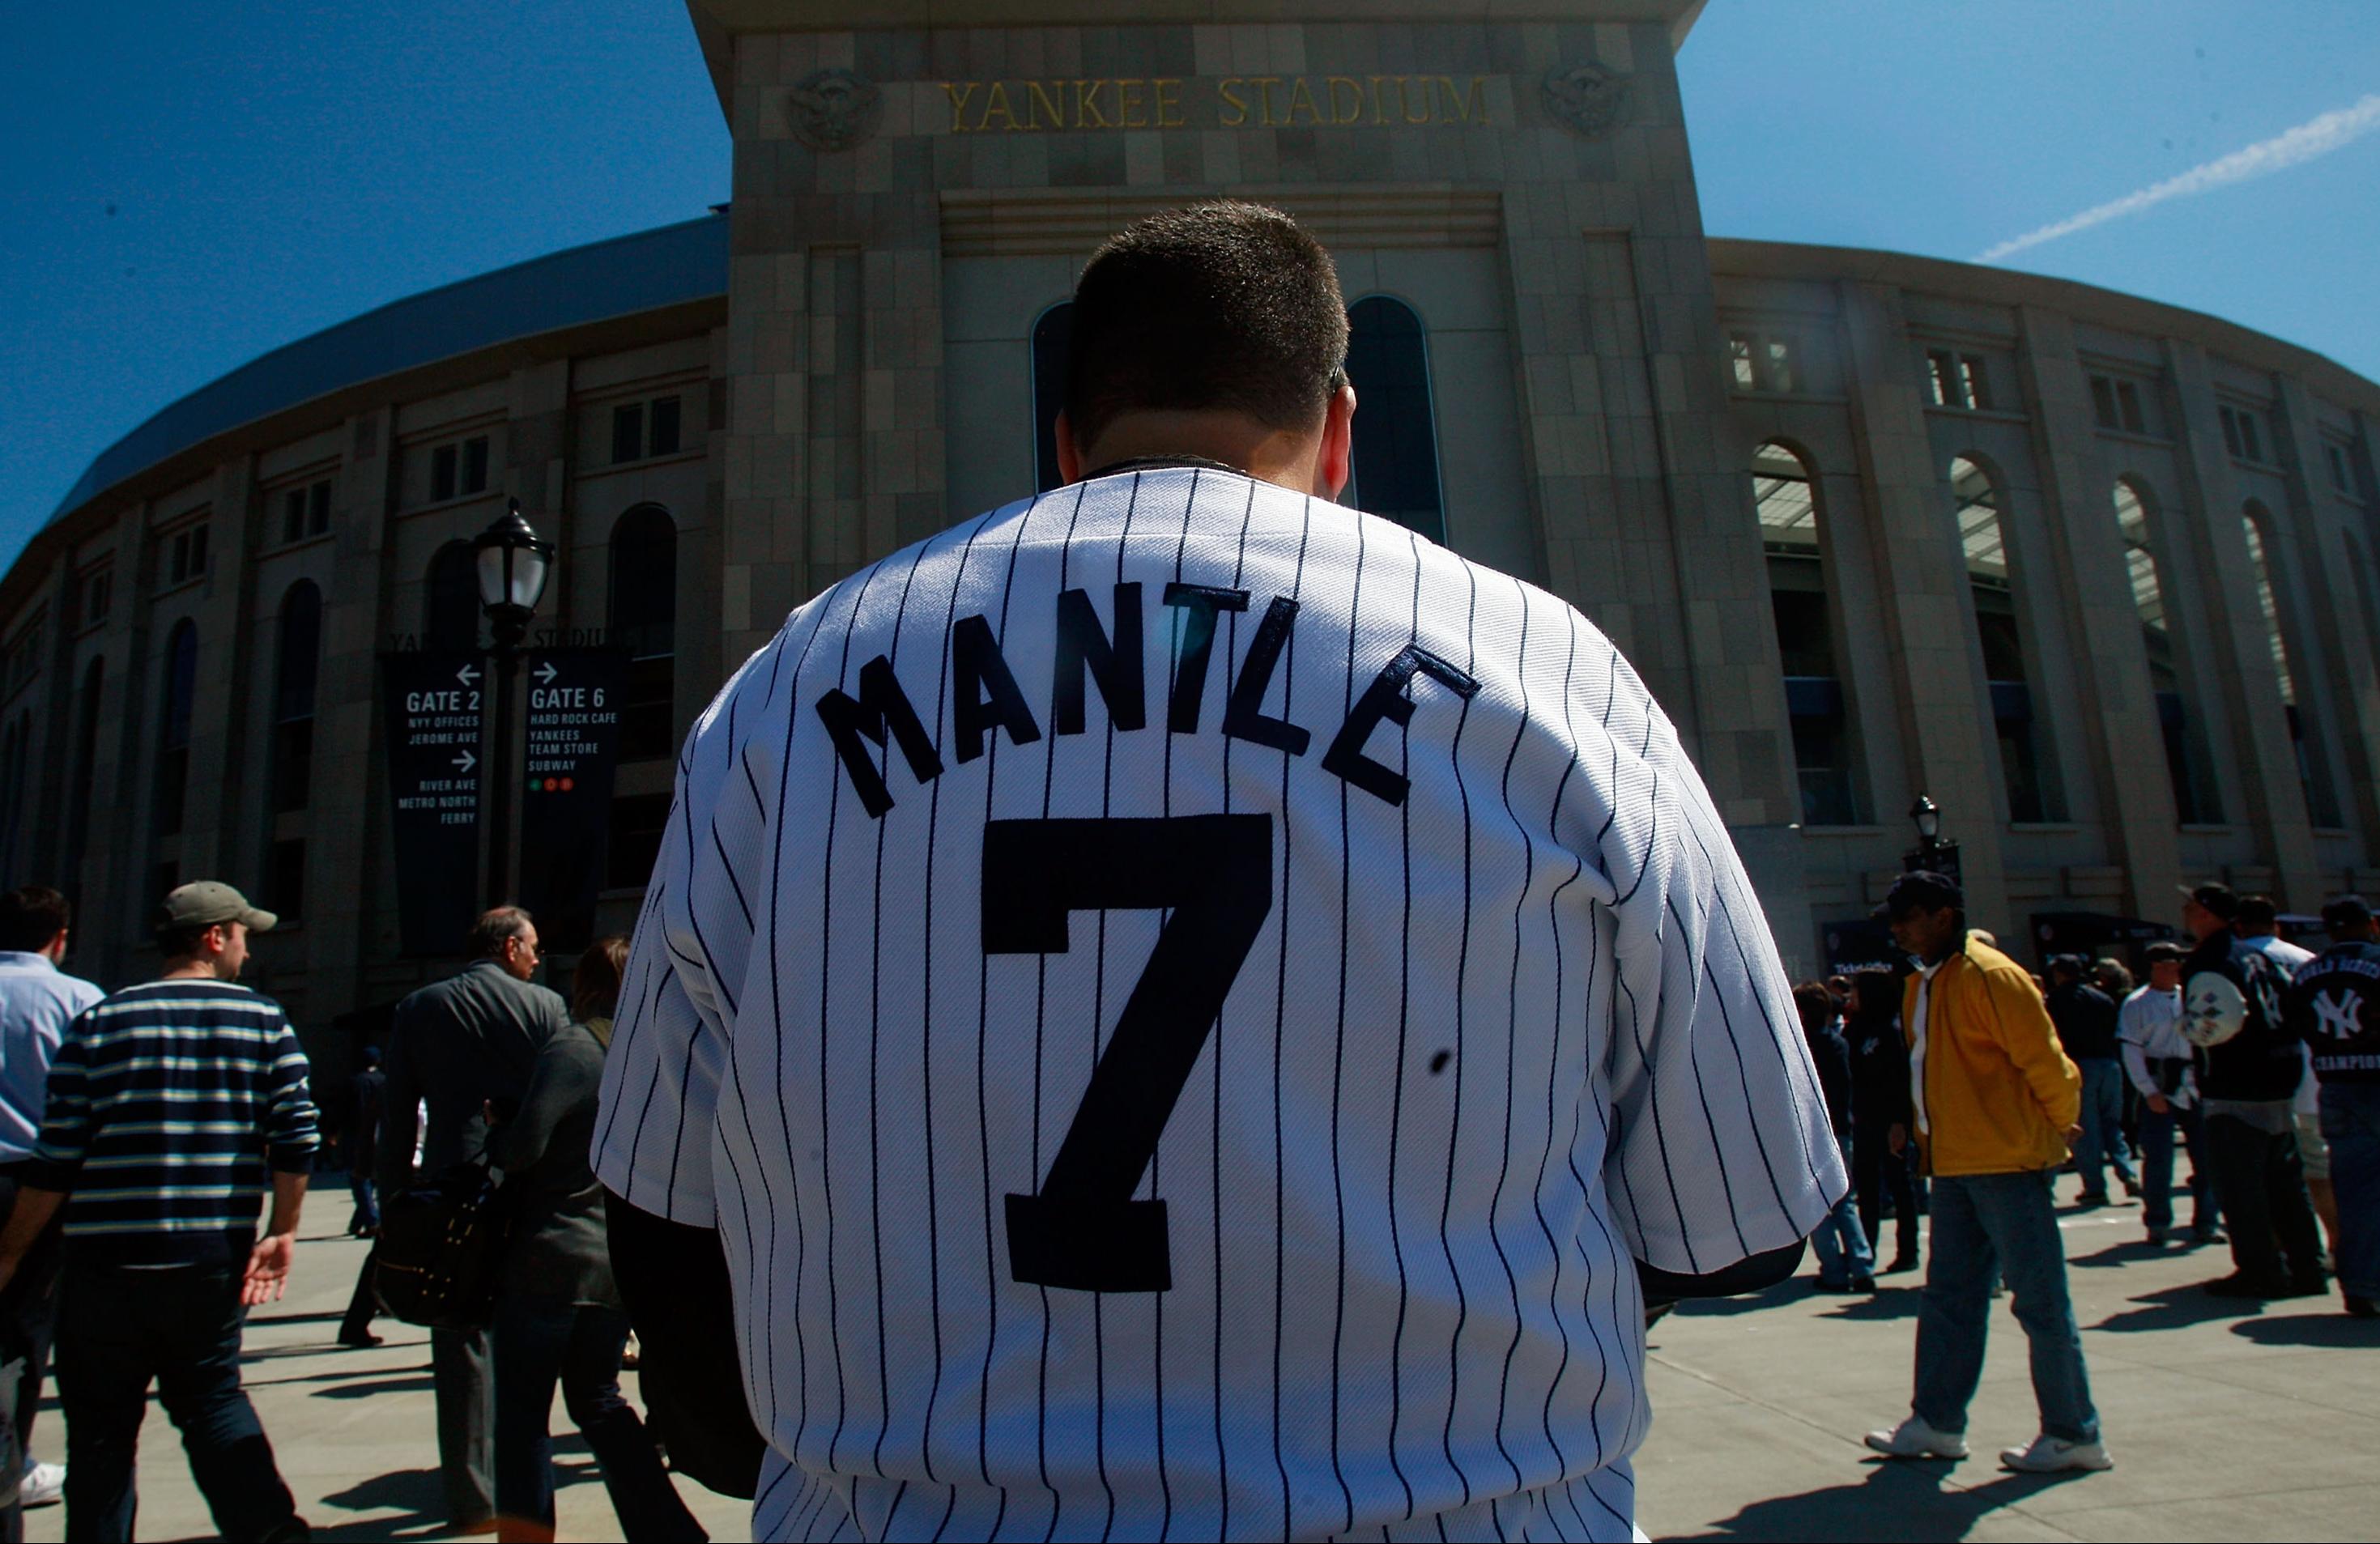 This game-worn Mickey Mantle jersey from 1958 shattered records